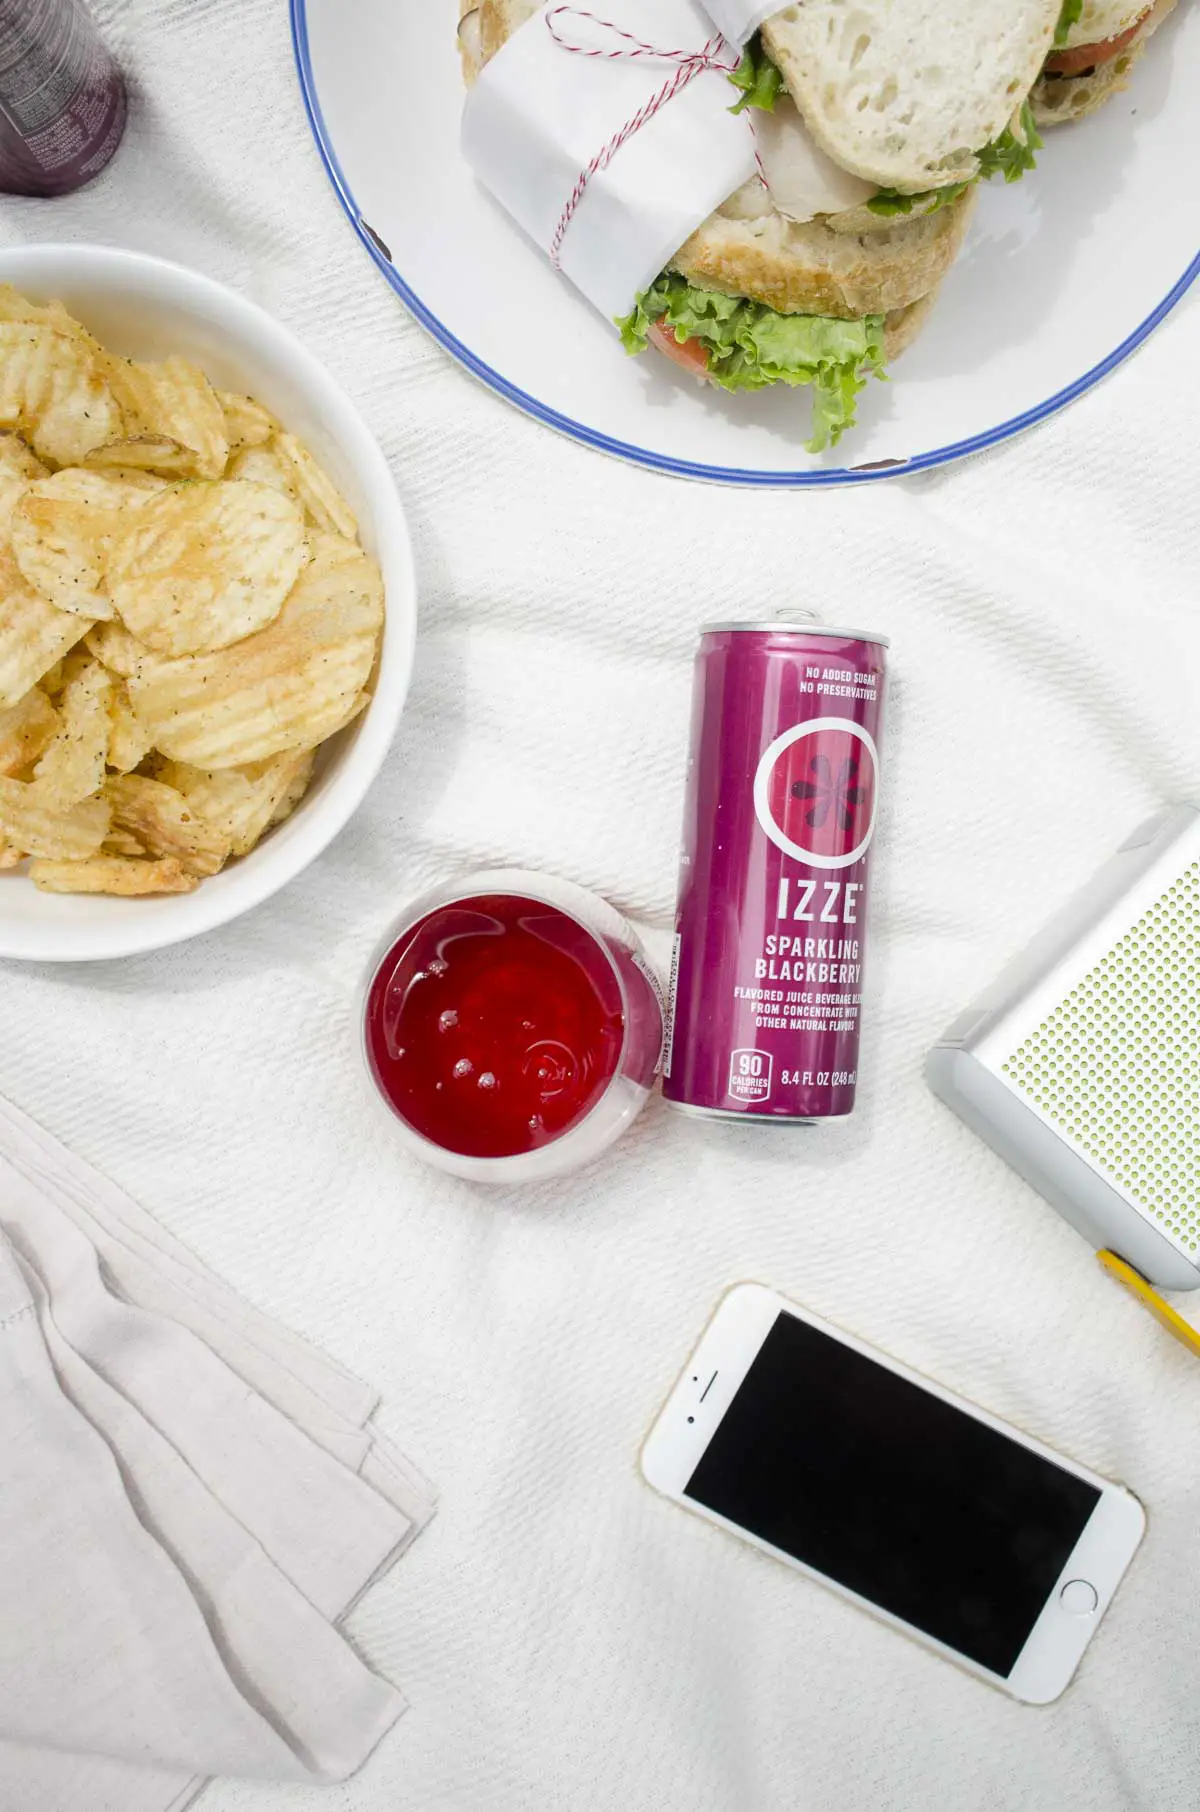 Modern picnic lunch with geometric picnic blanket on @thouswellblog